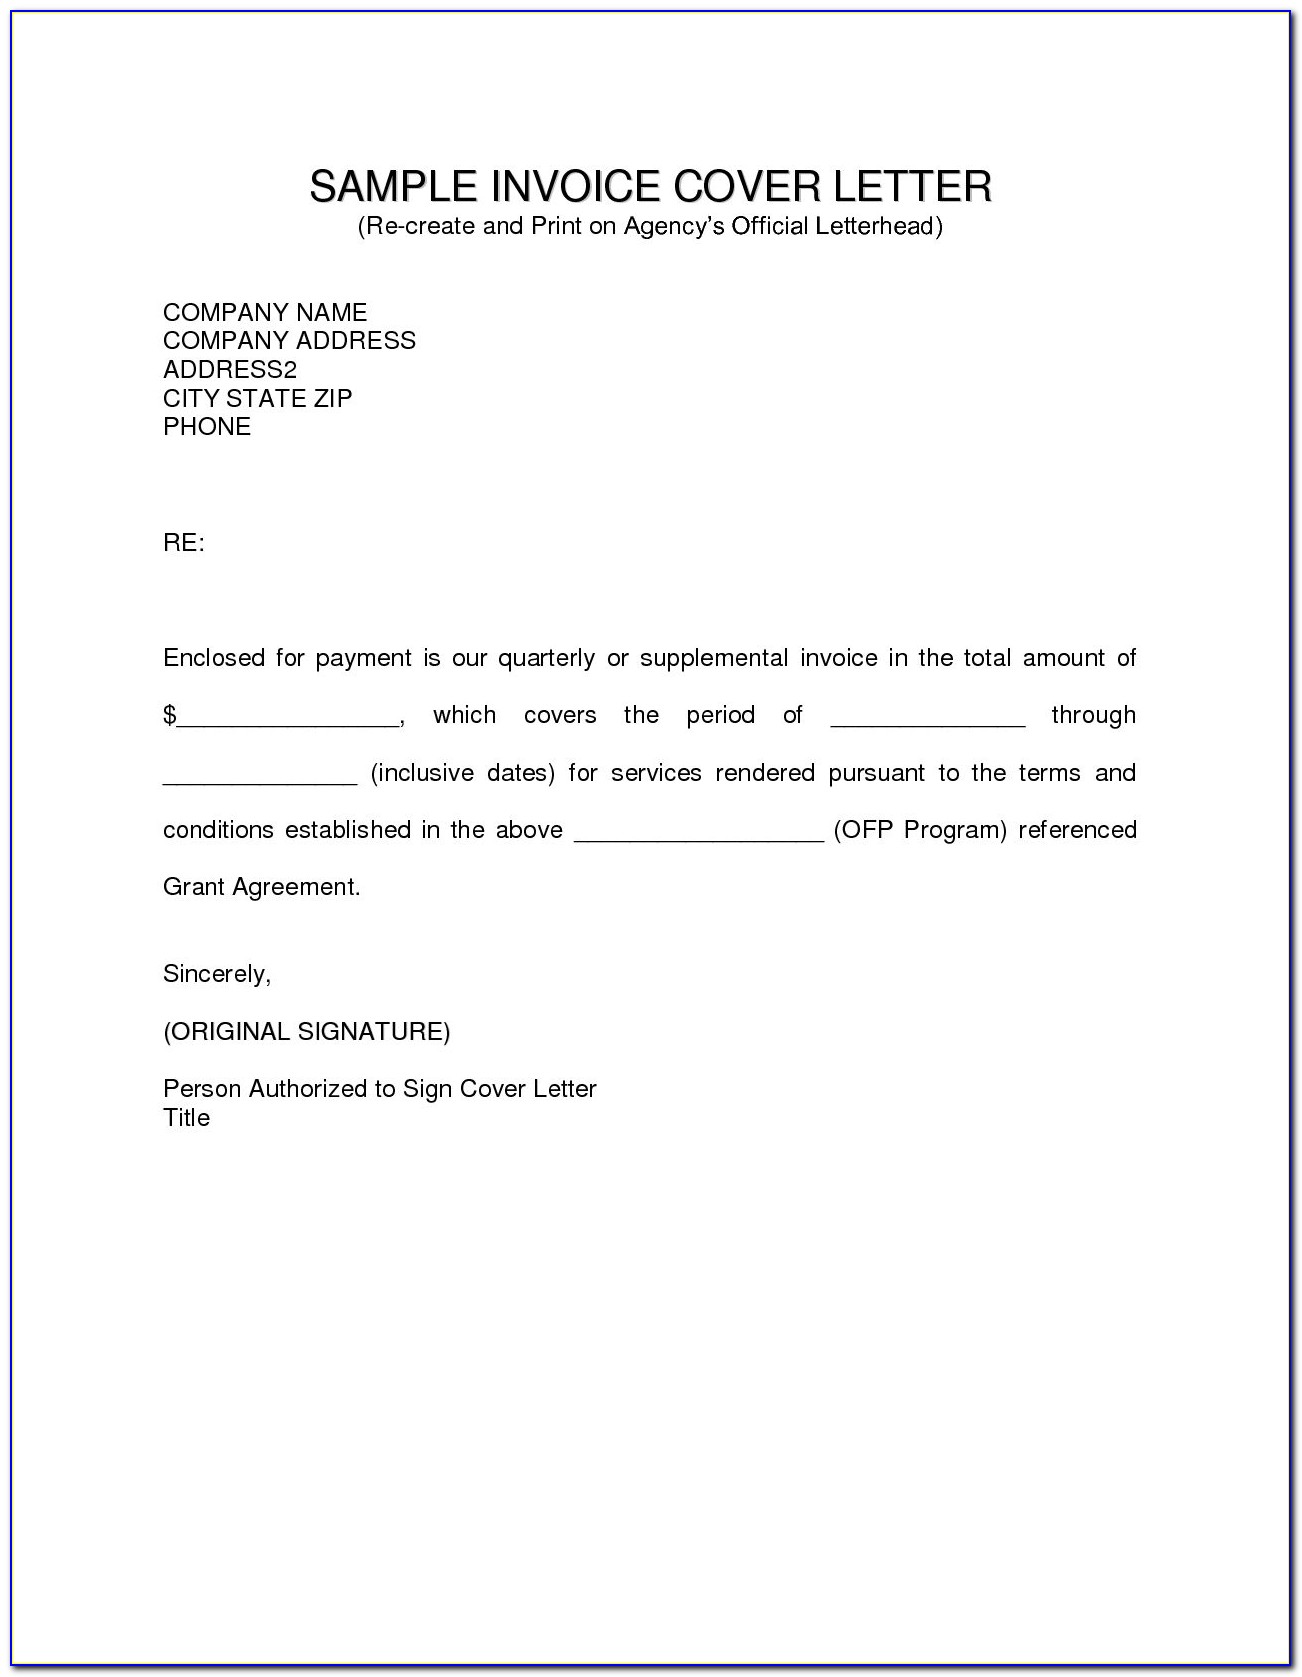 Sample Invoice Cover Letter For Payment